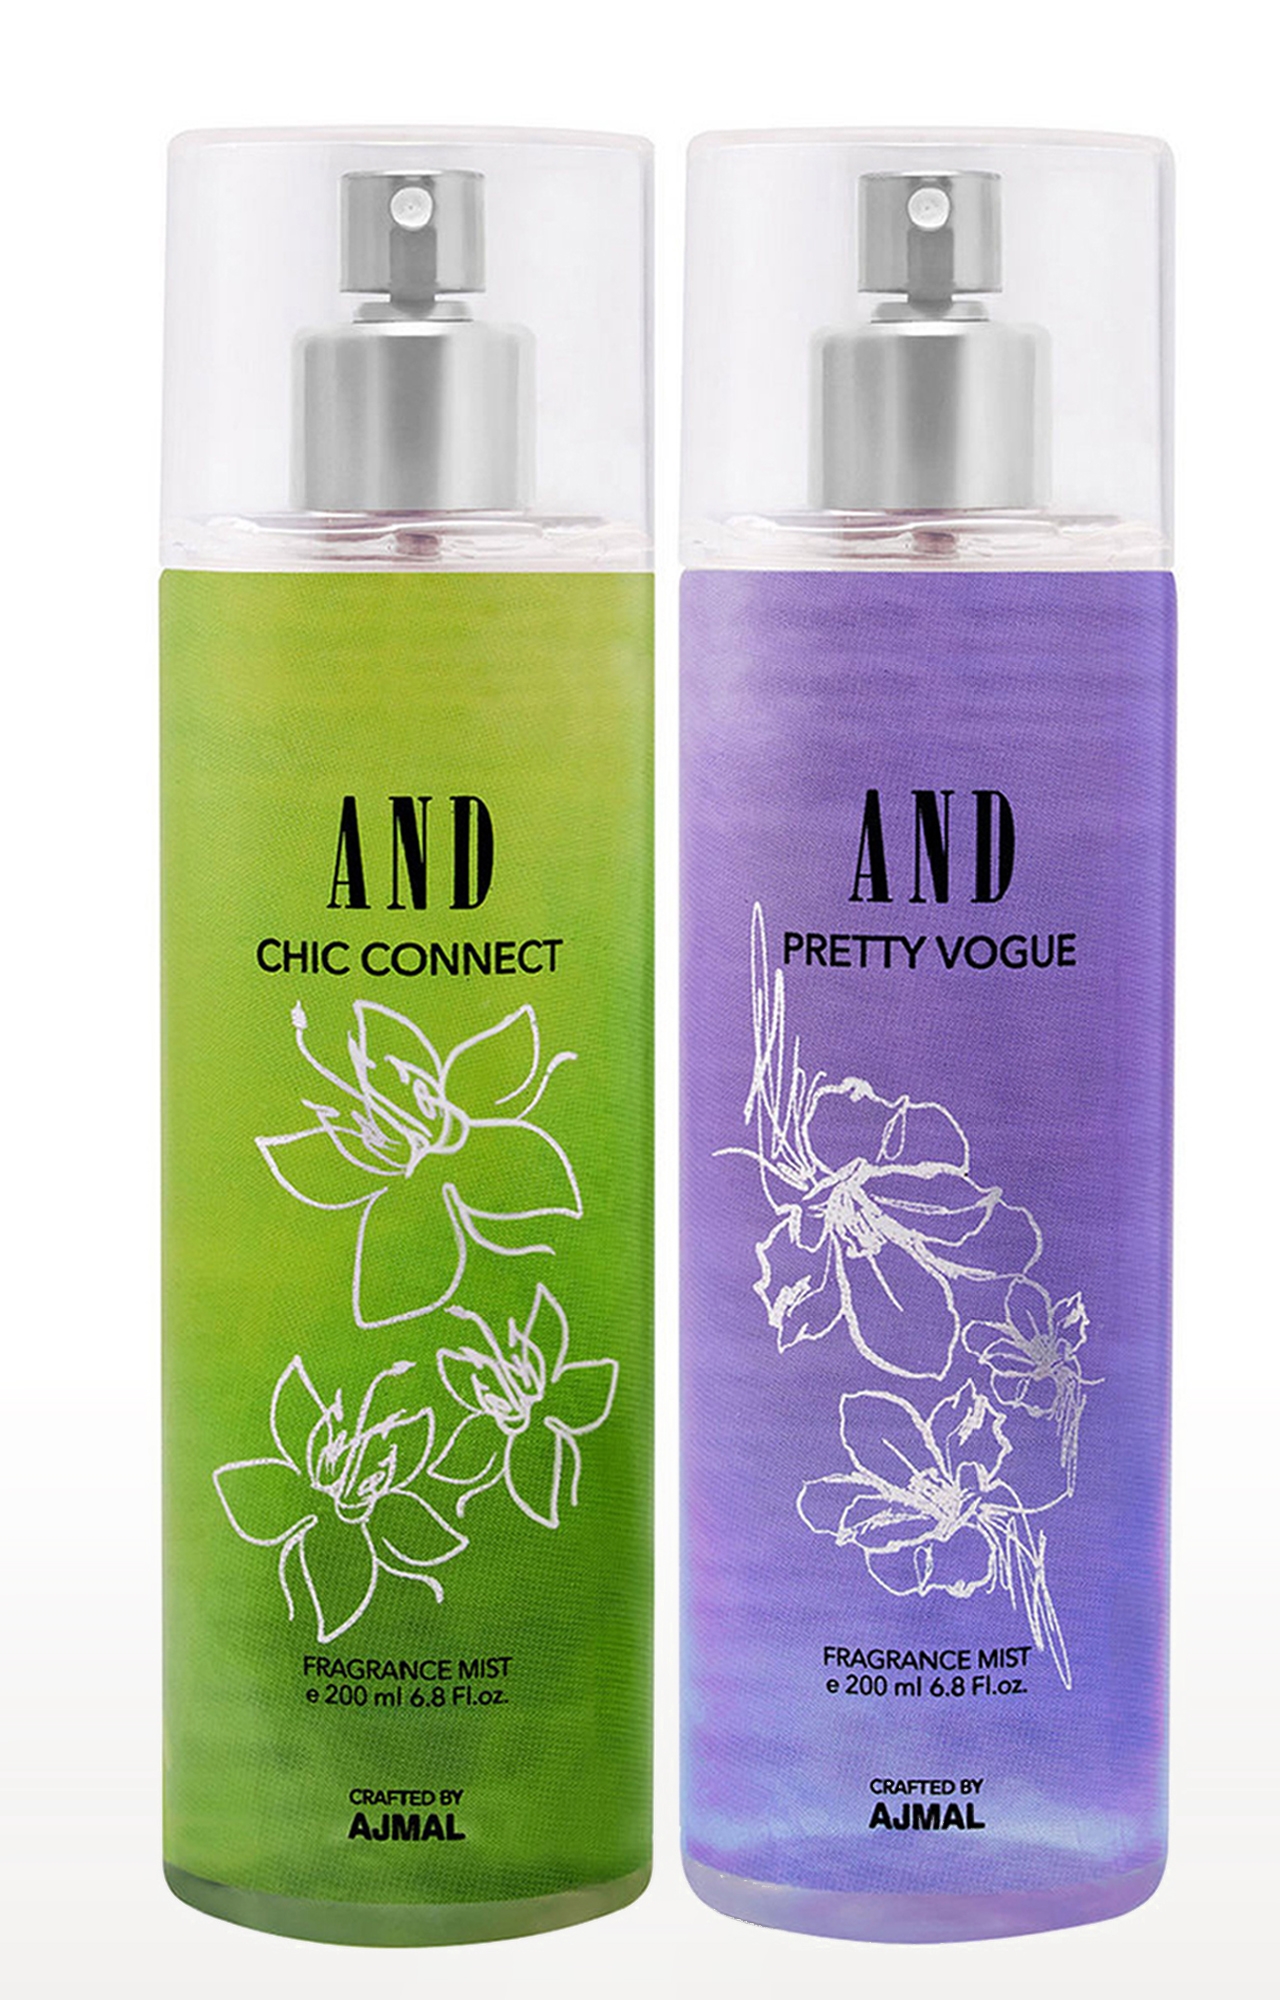 AND Chic Connect & Pretty Vogue Pack of 2 Body Mist 200ML each Long Lasting Scent Spray Gift For Women Perfume Crafted by Ajmal FREE